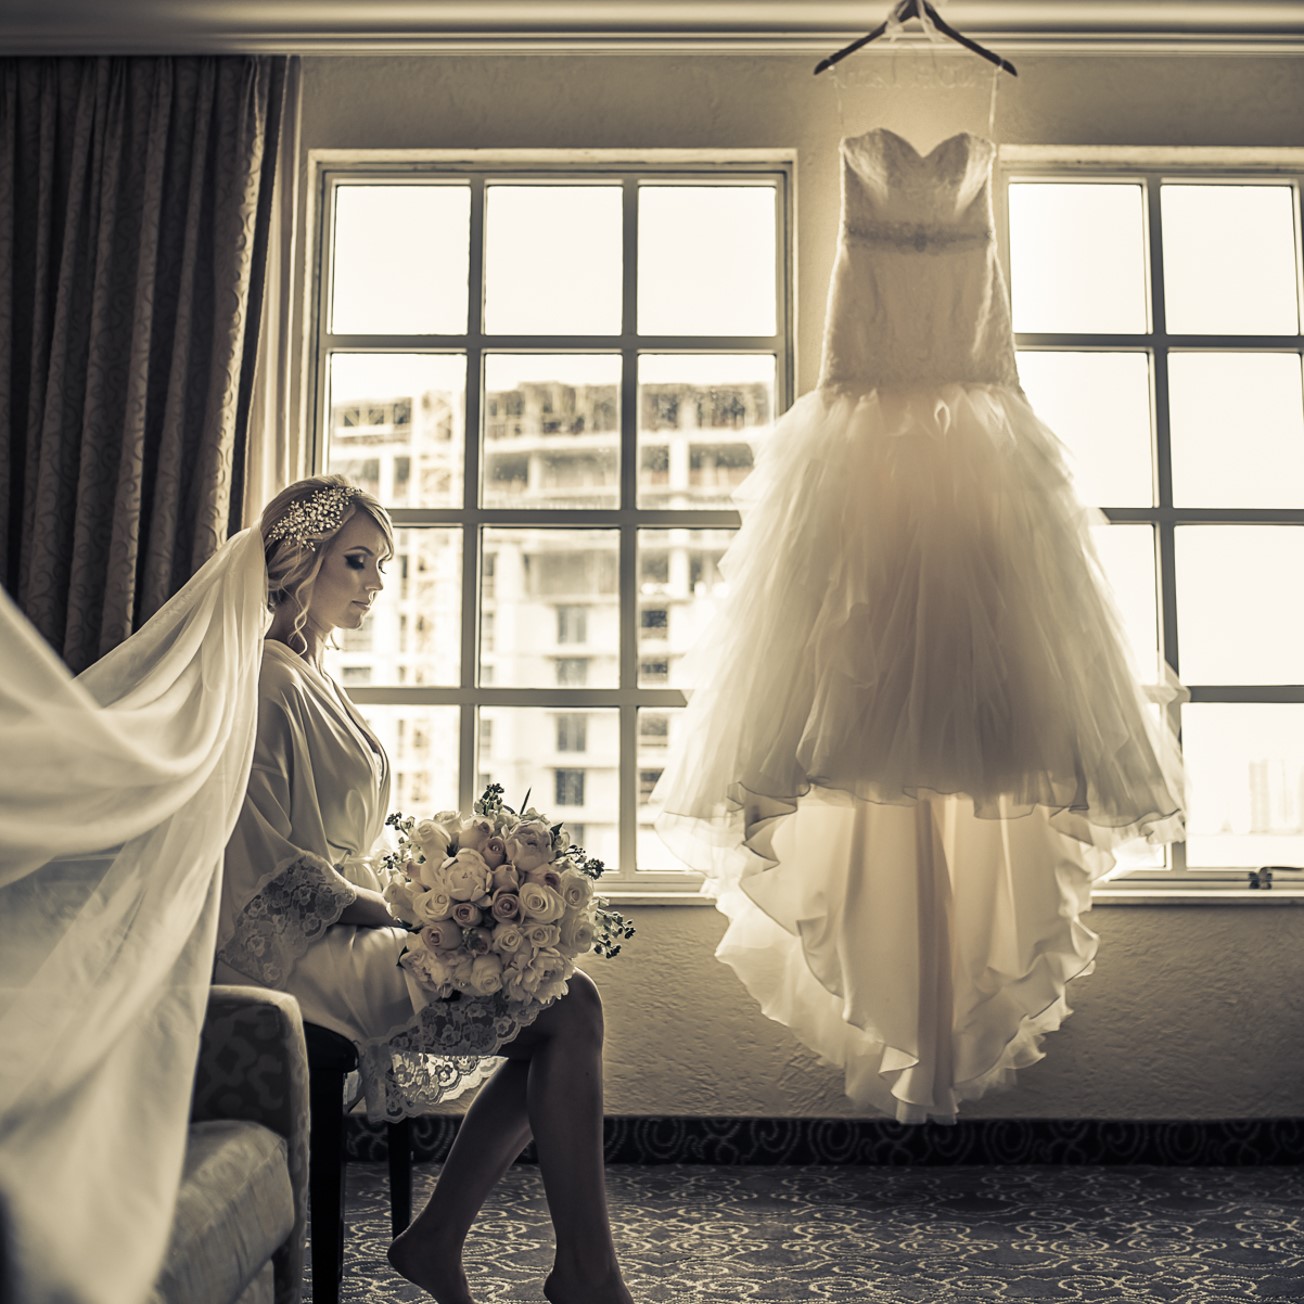 bridal suite with wedding dress and bouquet